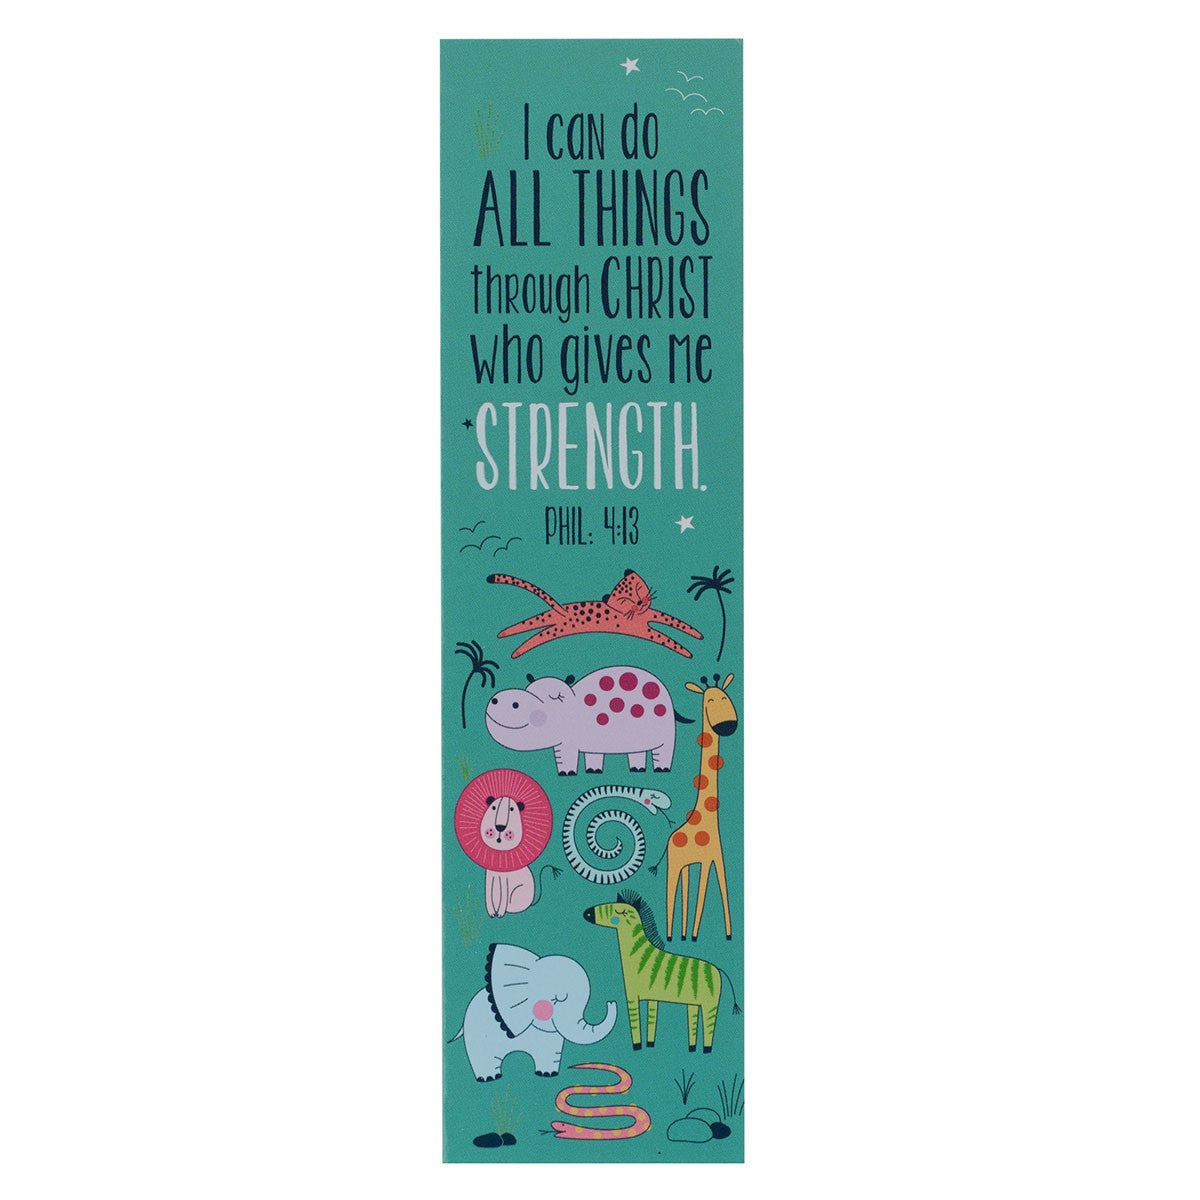 BOOKMARK PACK OF 10 - I CAN DO EVERYTHING